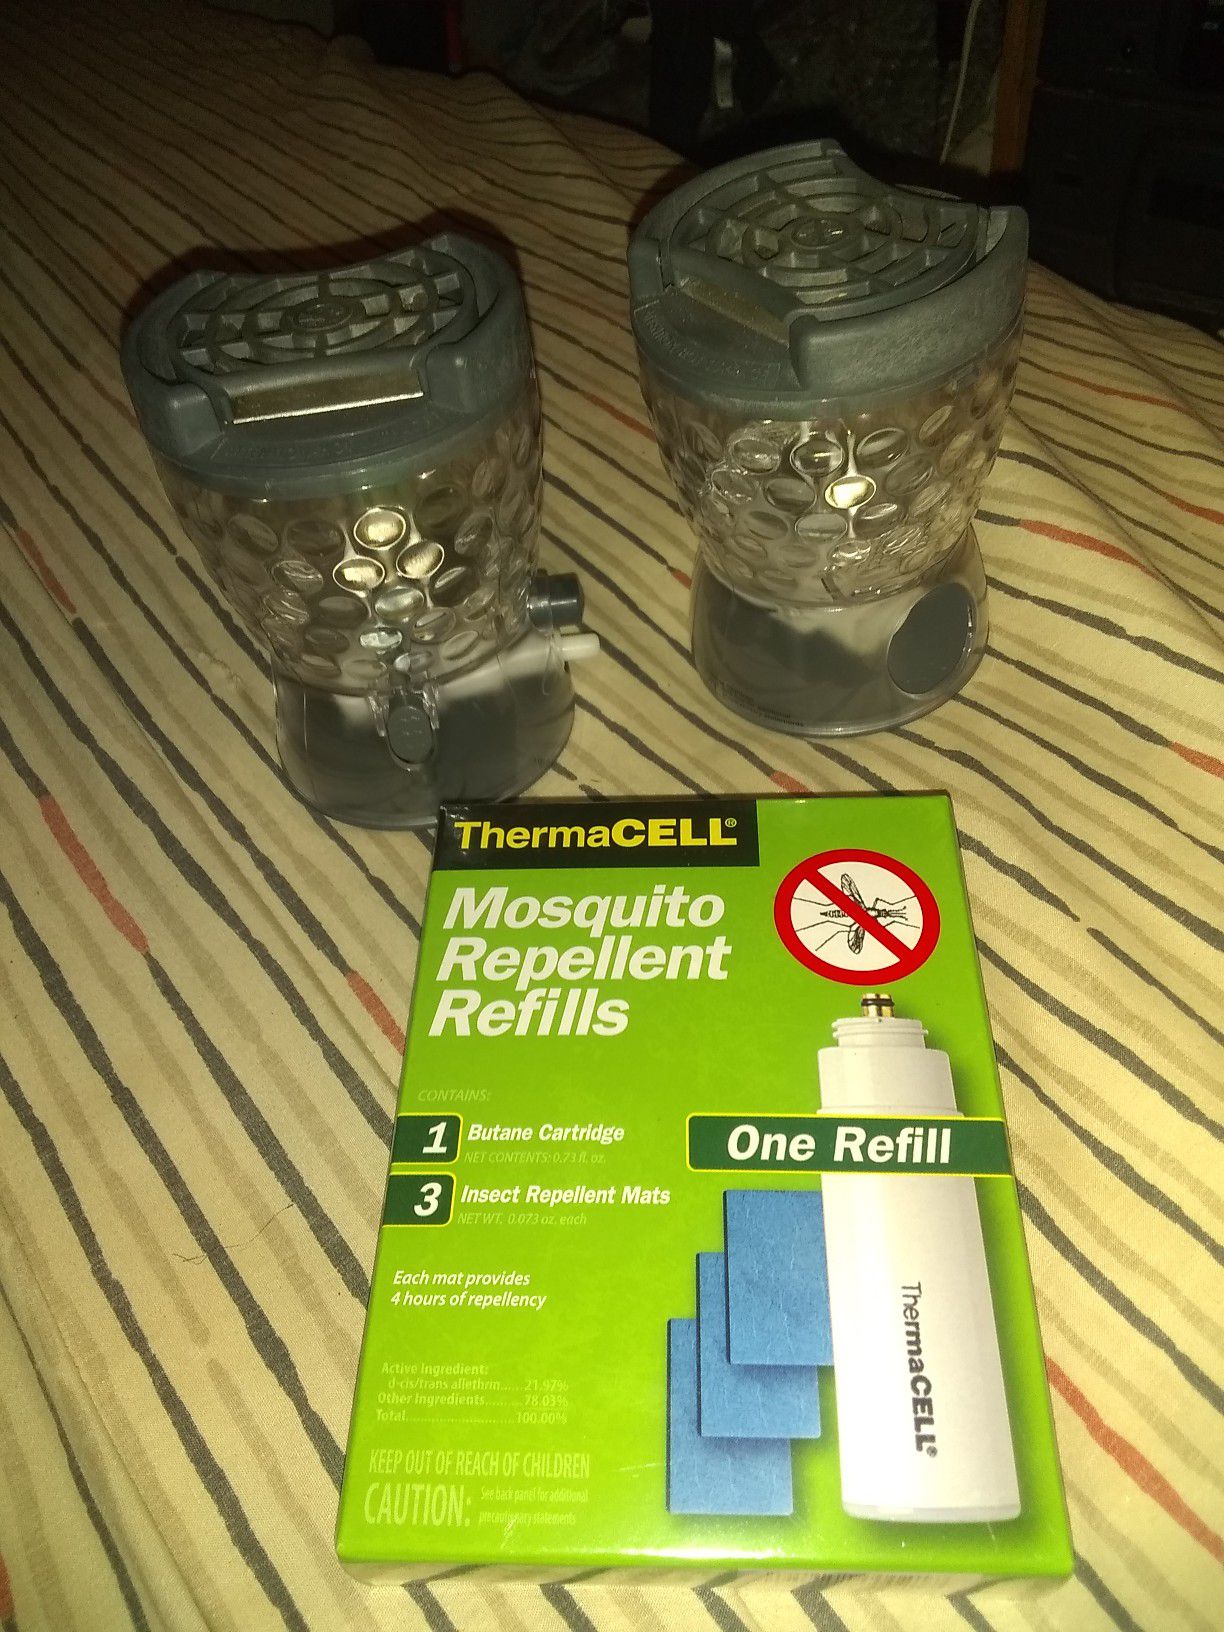 ThermaCell Lanterns And 1 Refill